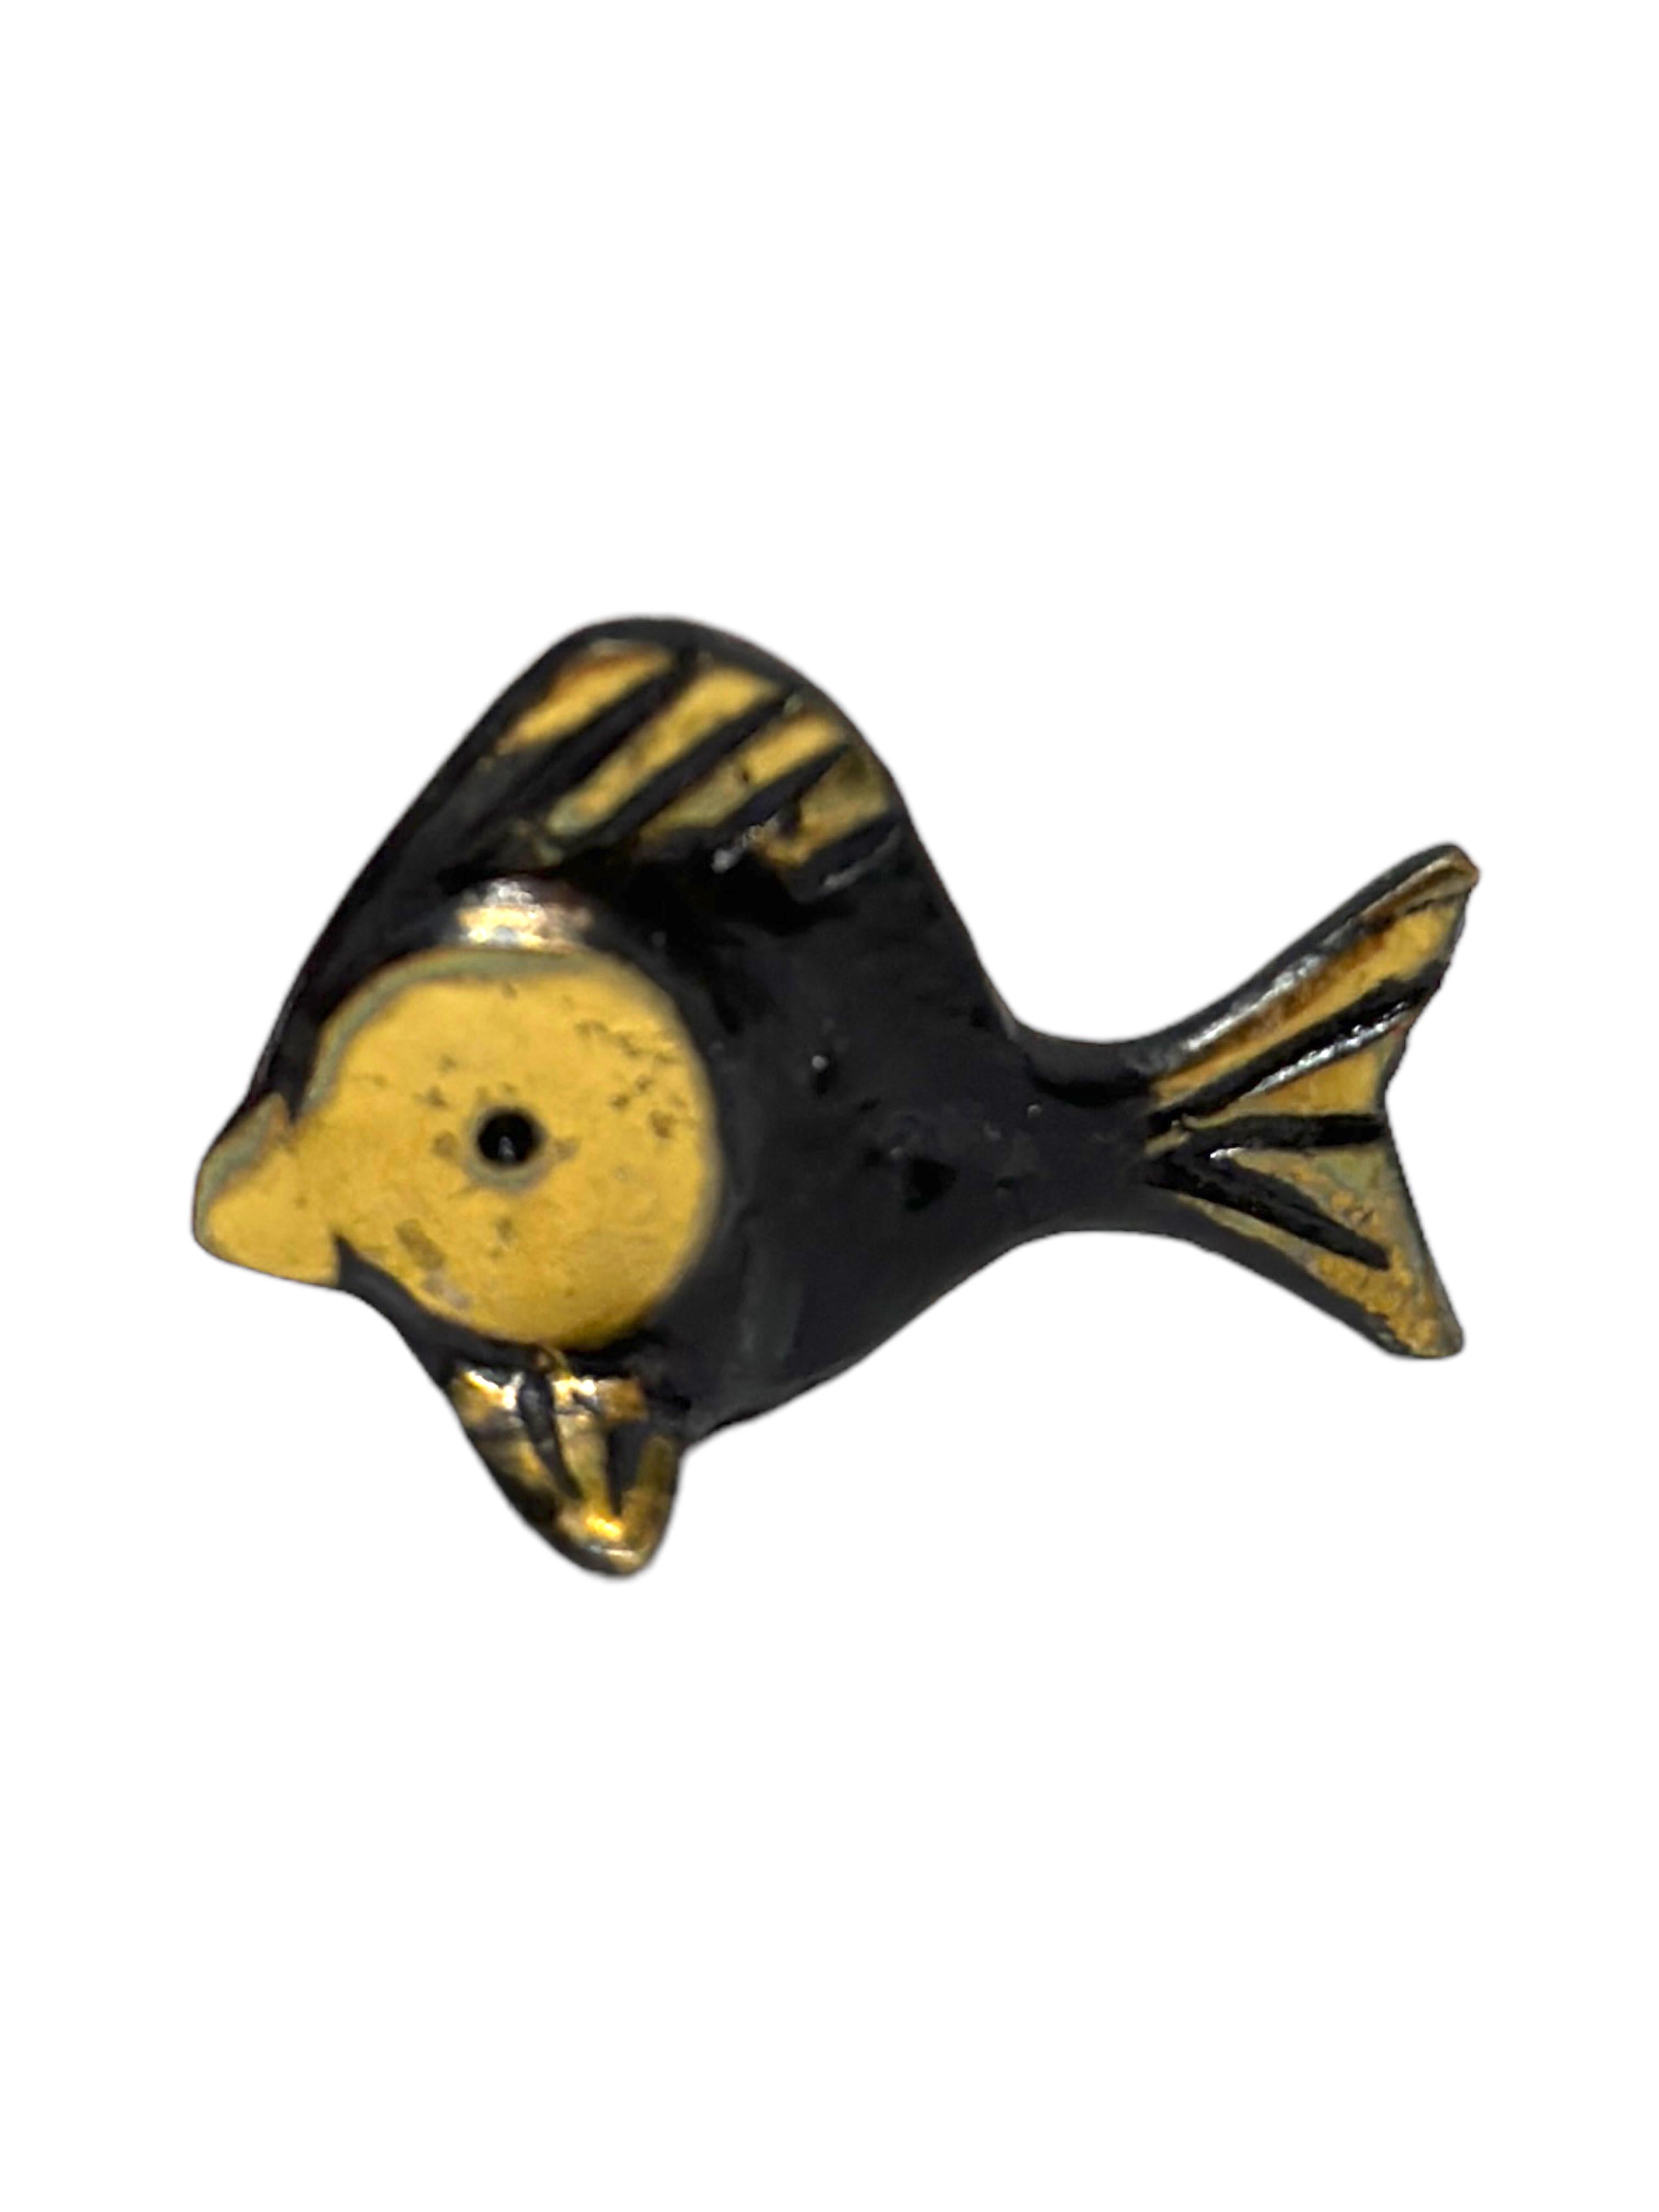 Mid-Century Modern Miniature Fish Figurine by Walter Bosse, circa 1950s For Sale